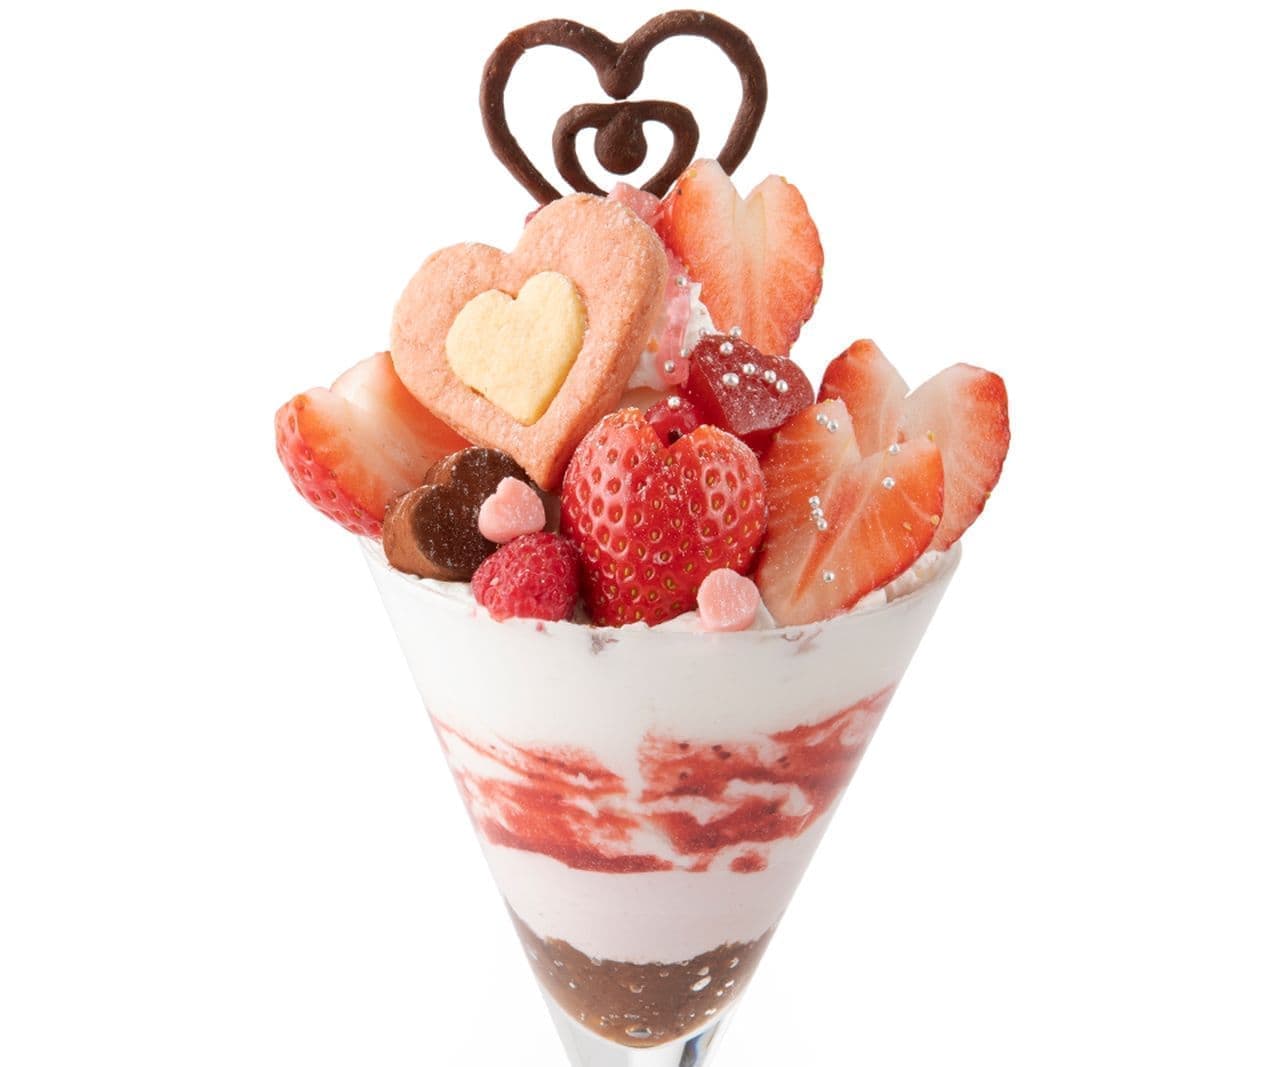 Valentine Parfait" and "Valentine Plate" at Kano Fruit Parlor